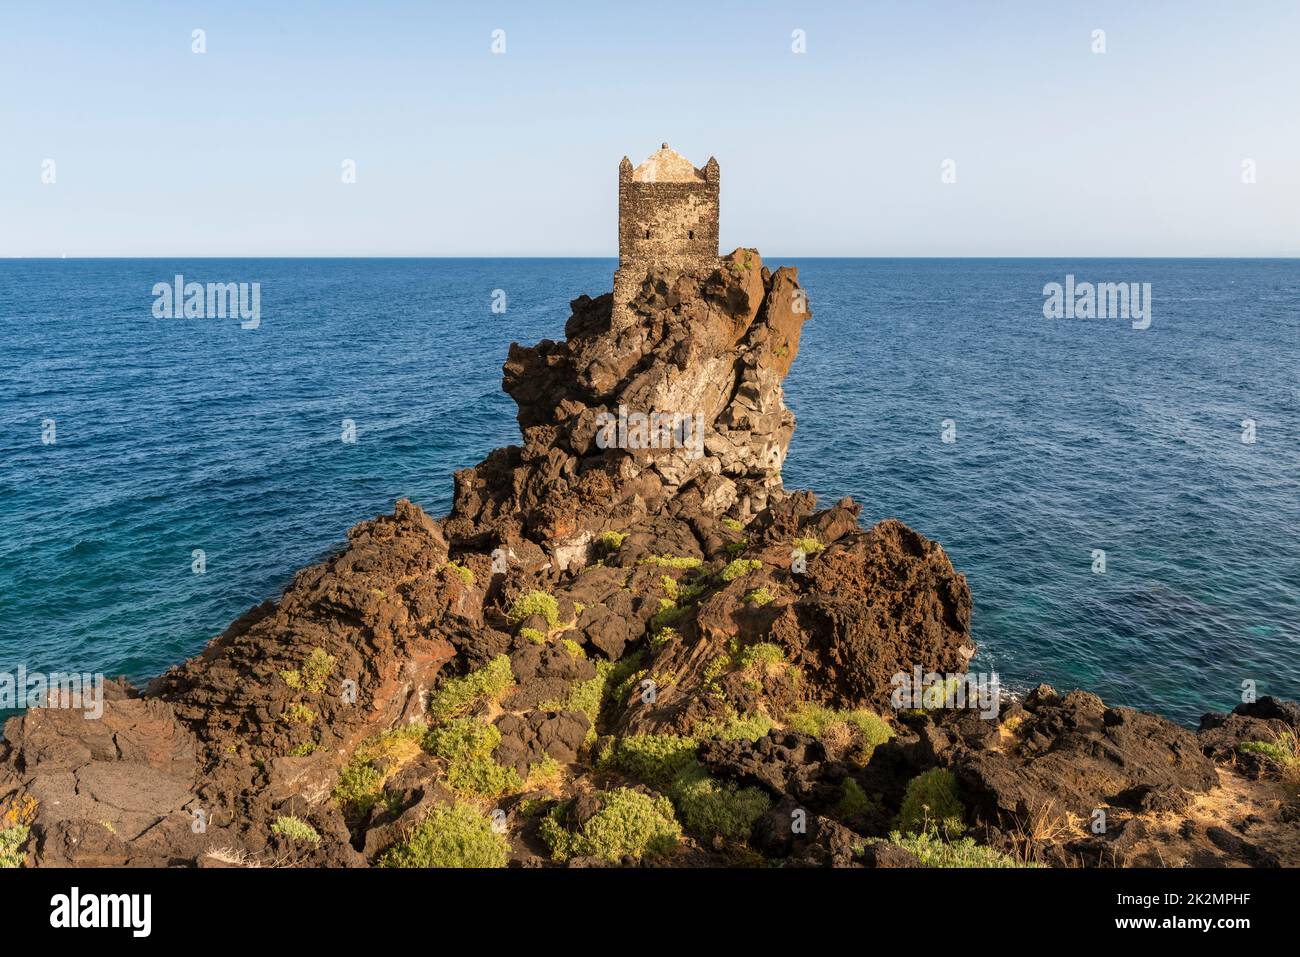 A medieval watchtower perched high on an outcrop of volcanic lava overlooking the Ionian Sea, near the little village of Santa Tecla, Acireale, Sicily Stock Photo